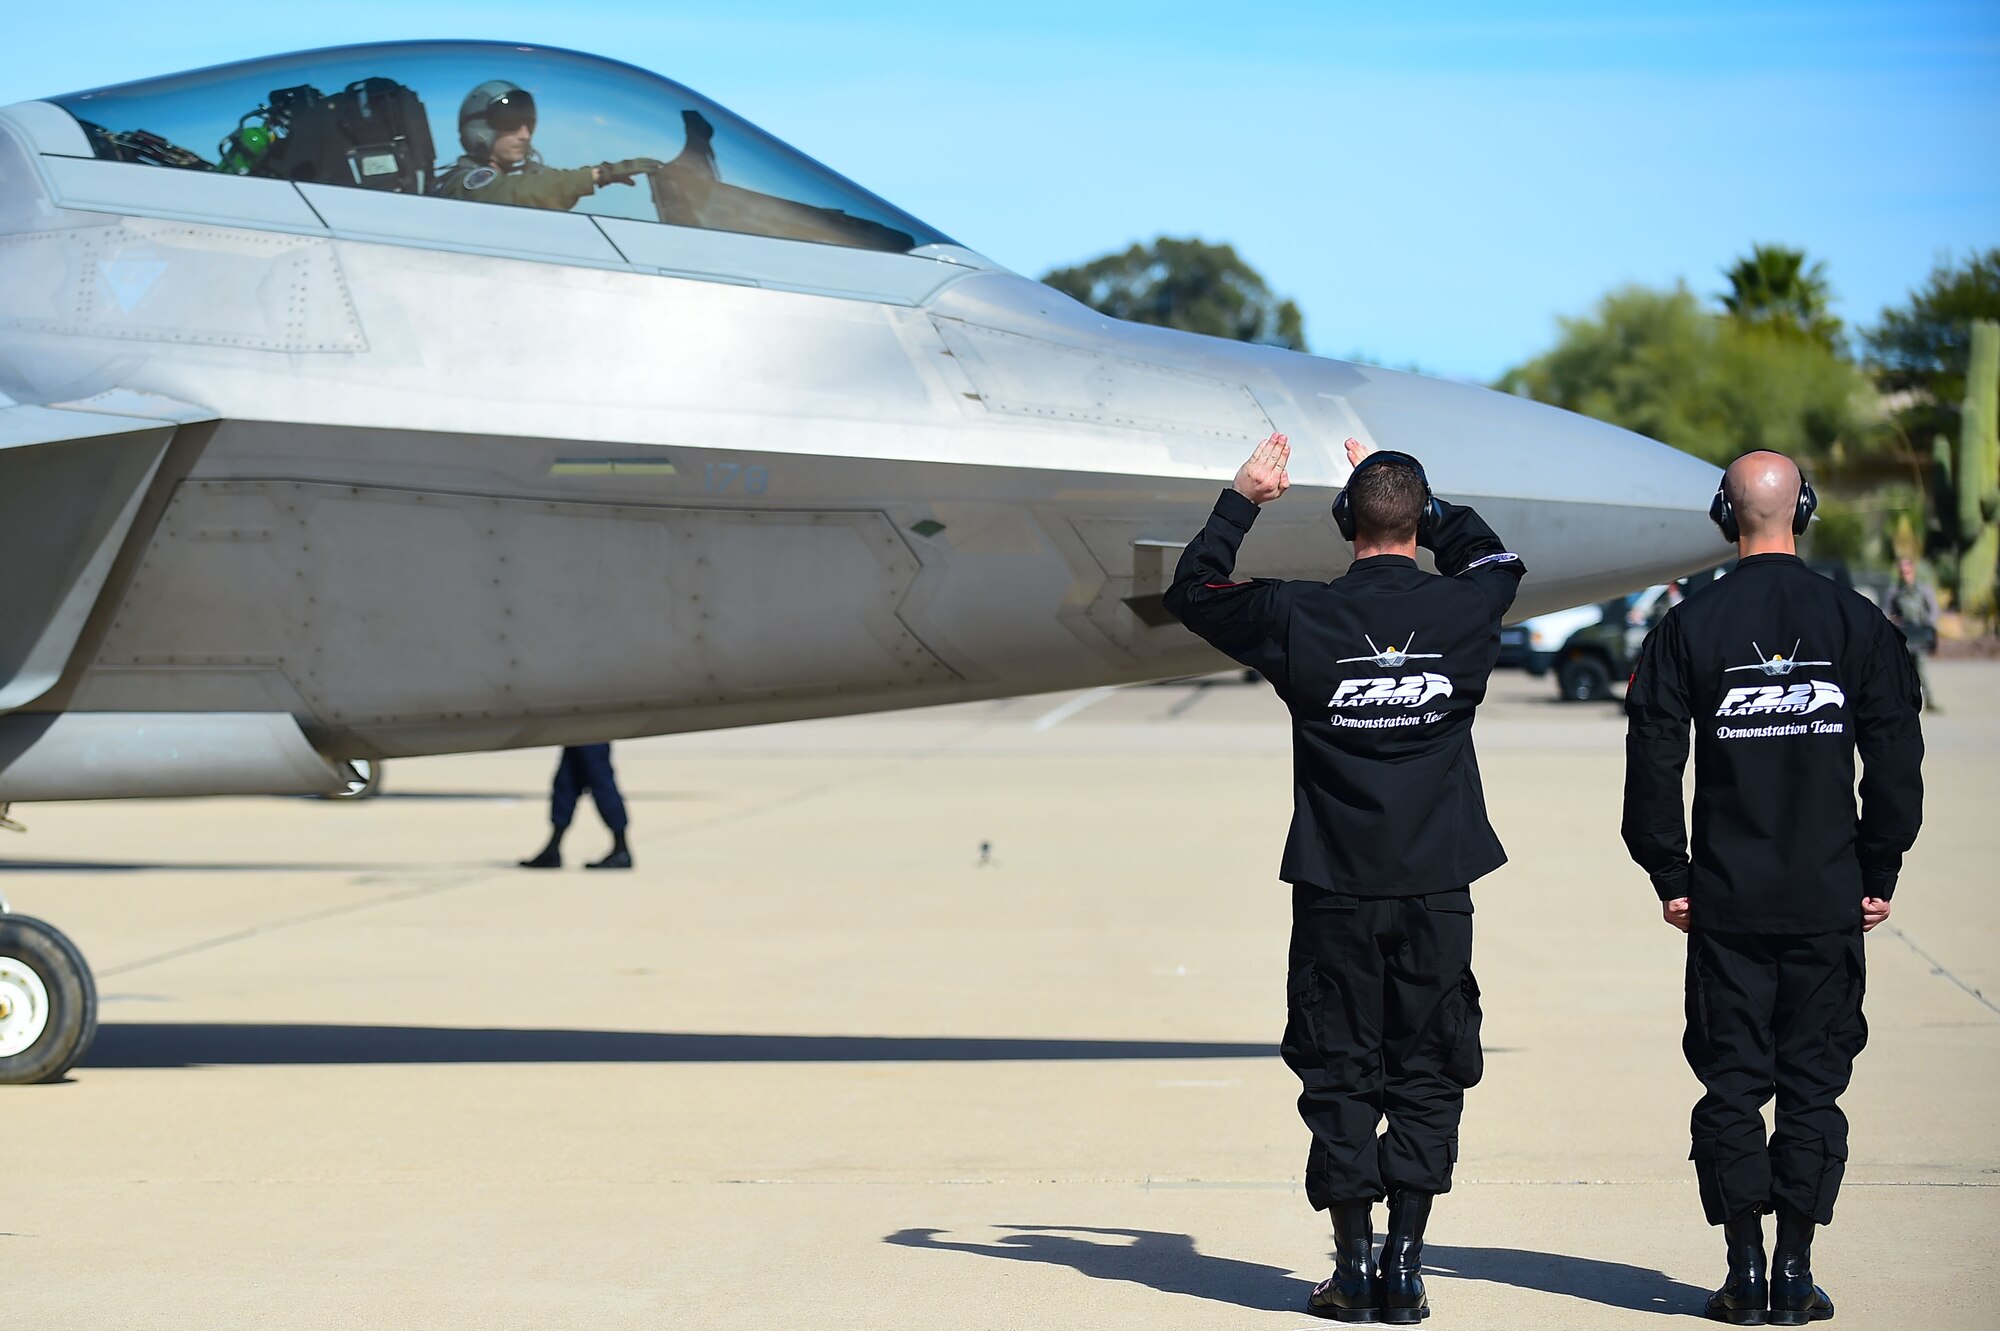 U.S. Air Force F-22 Raptor Demonstration Team crew chiefs, signal to an F-22 Raptor before take-off at the 2017 Heritage Flight Training and Certification Course at Davis-Monthan Air Force Base, Ariz., Feb. 9, 2017. The Demonstration Team assisted with more than 6 launches of the aircraft during the training and certification course. (U.S. Air Force photo by Senior Airman Kimberly Nagle) 